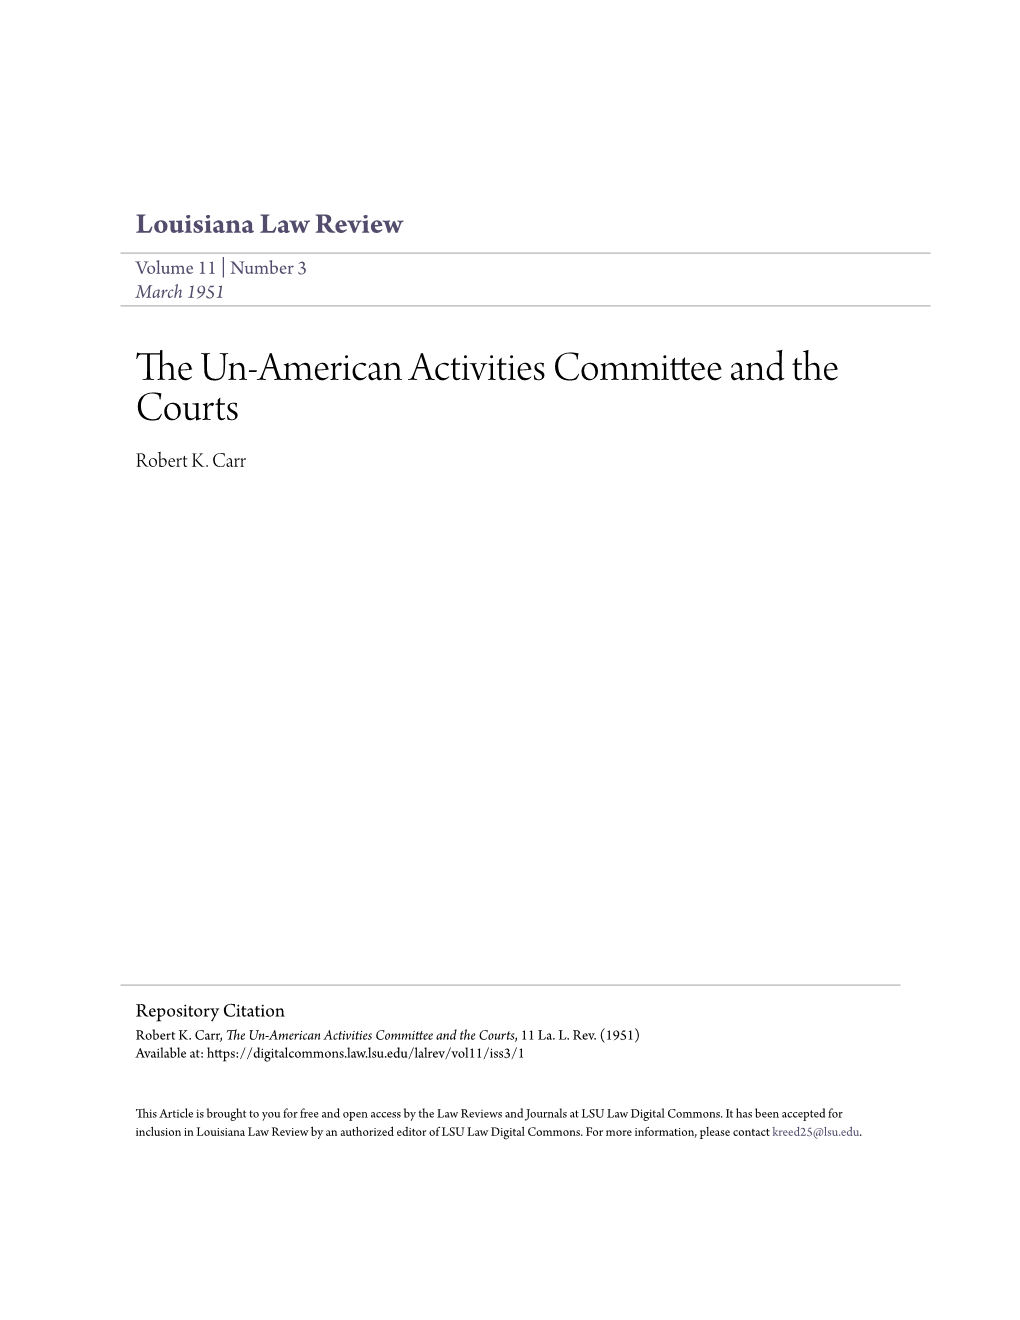 The Un-American Activities Committee and the Courts, 11 La